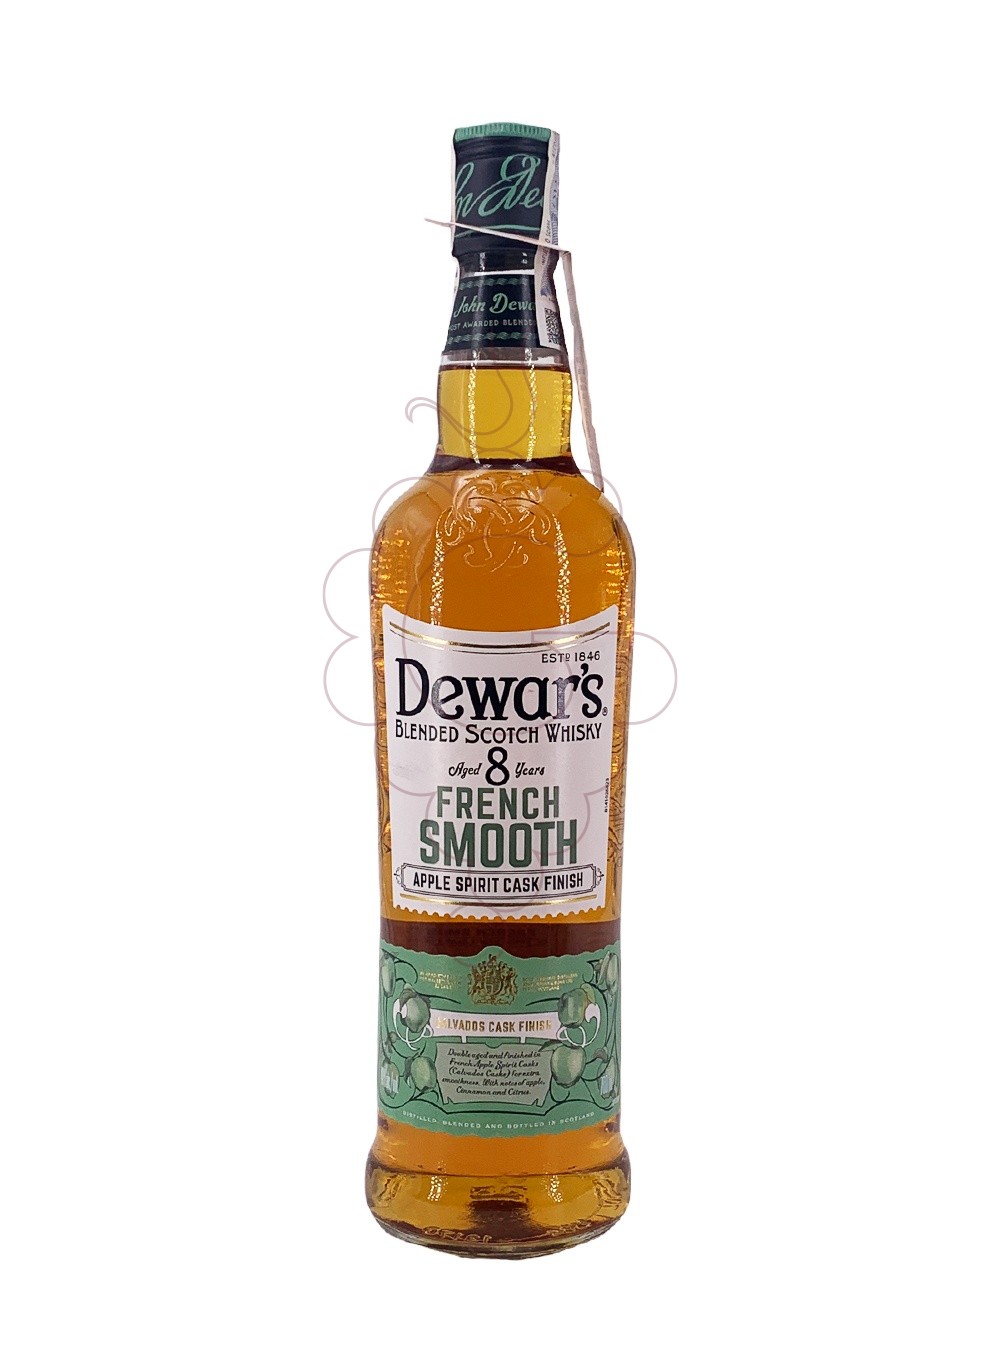 Foto Whisky Dewar's French Smooth 8 Anys